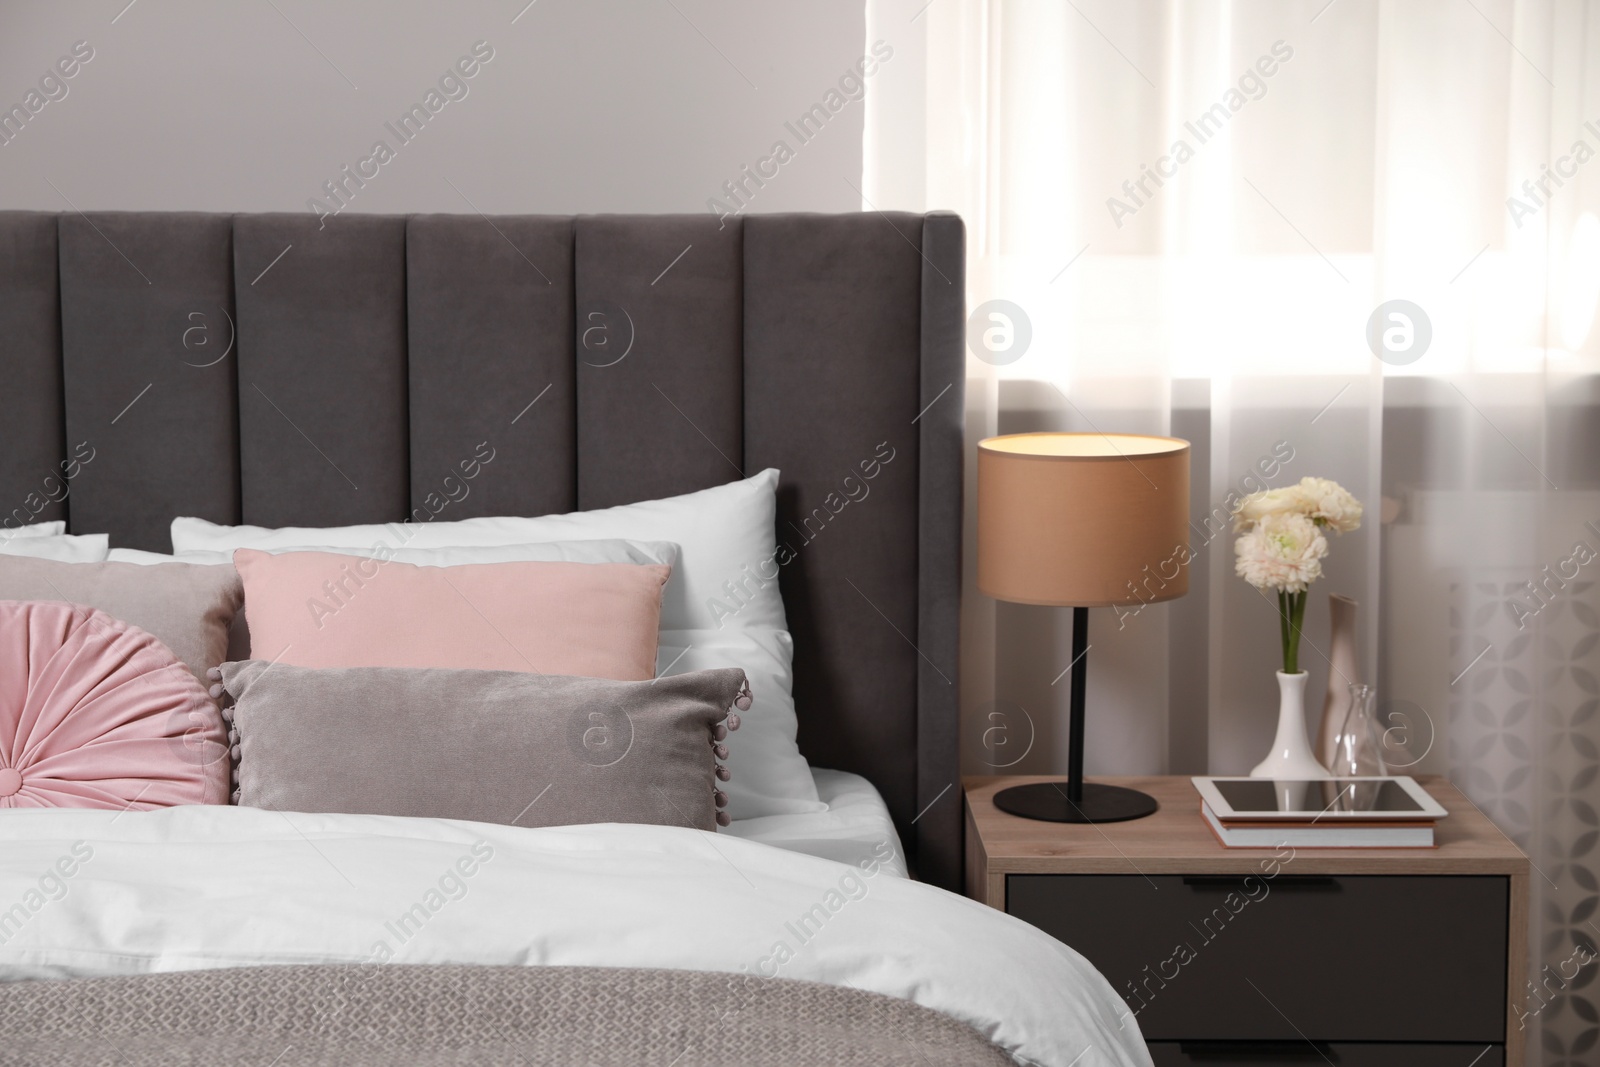 Photo of Comfortable bed with cushions, lamp and different decor on bedside table in room. Stylish interior